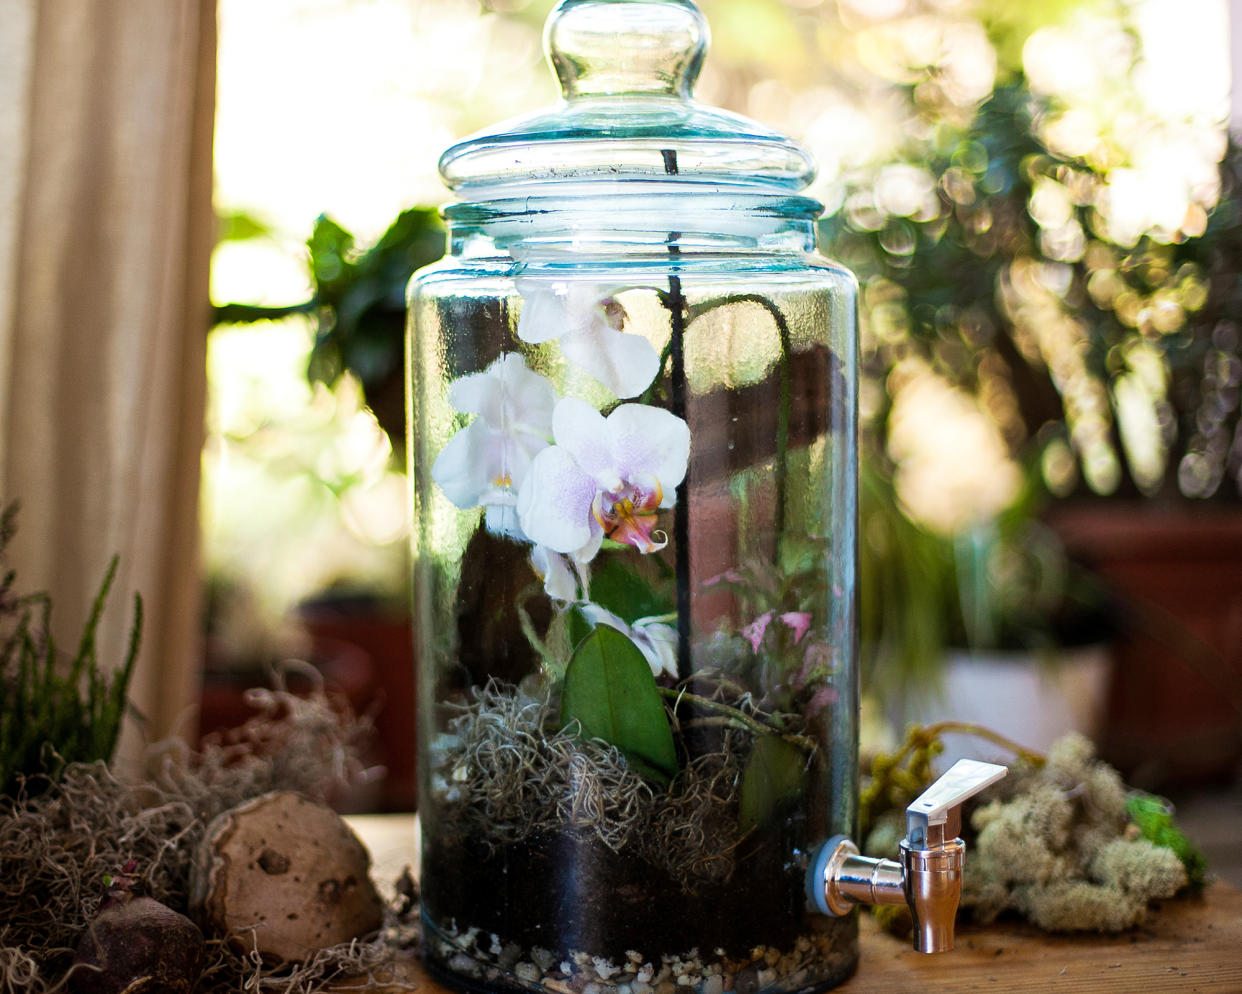  When learning how to make an orchid terrarium, you need to decide whether it should be open or closed. This closed terrarium contains a beautiful white orchid. 